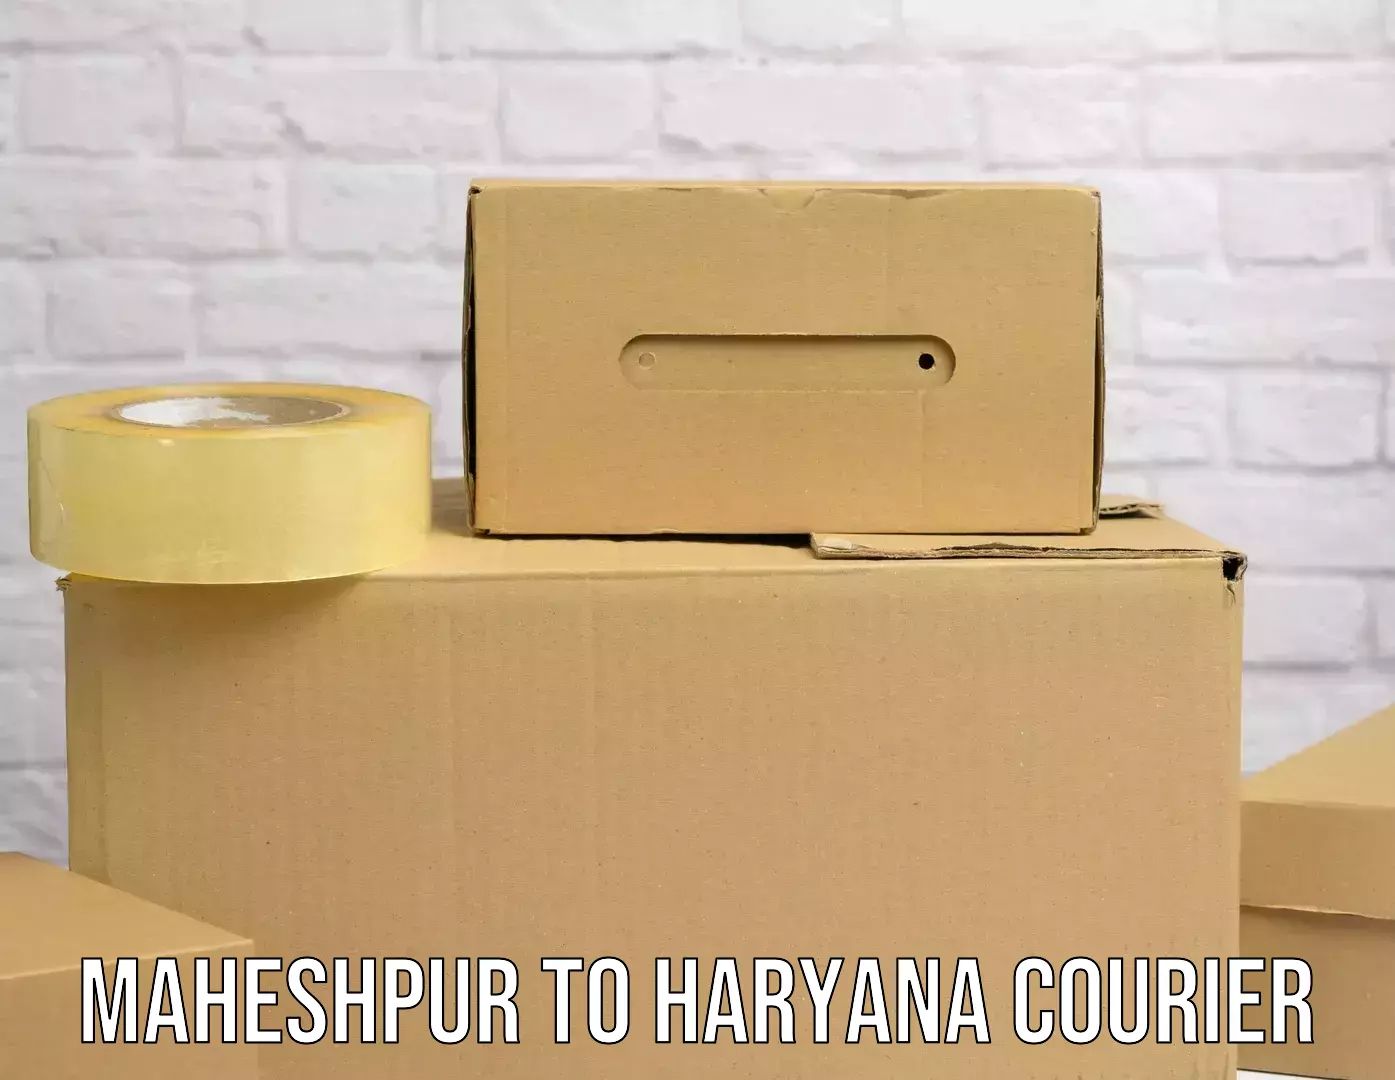 Same-day delivery solutions Maheshpur to IIIT Sonepat